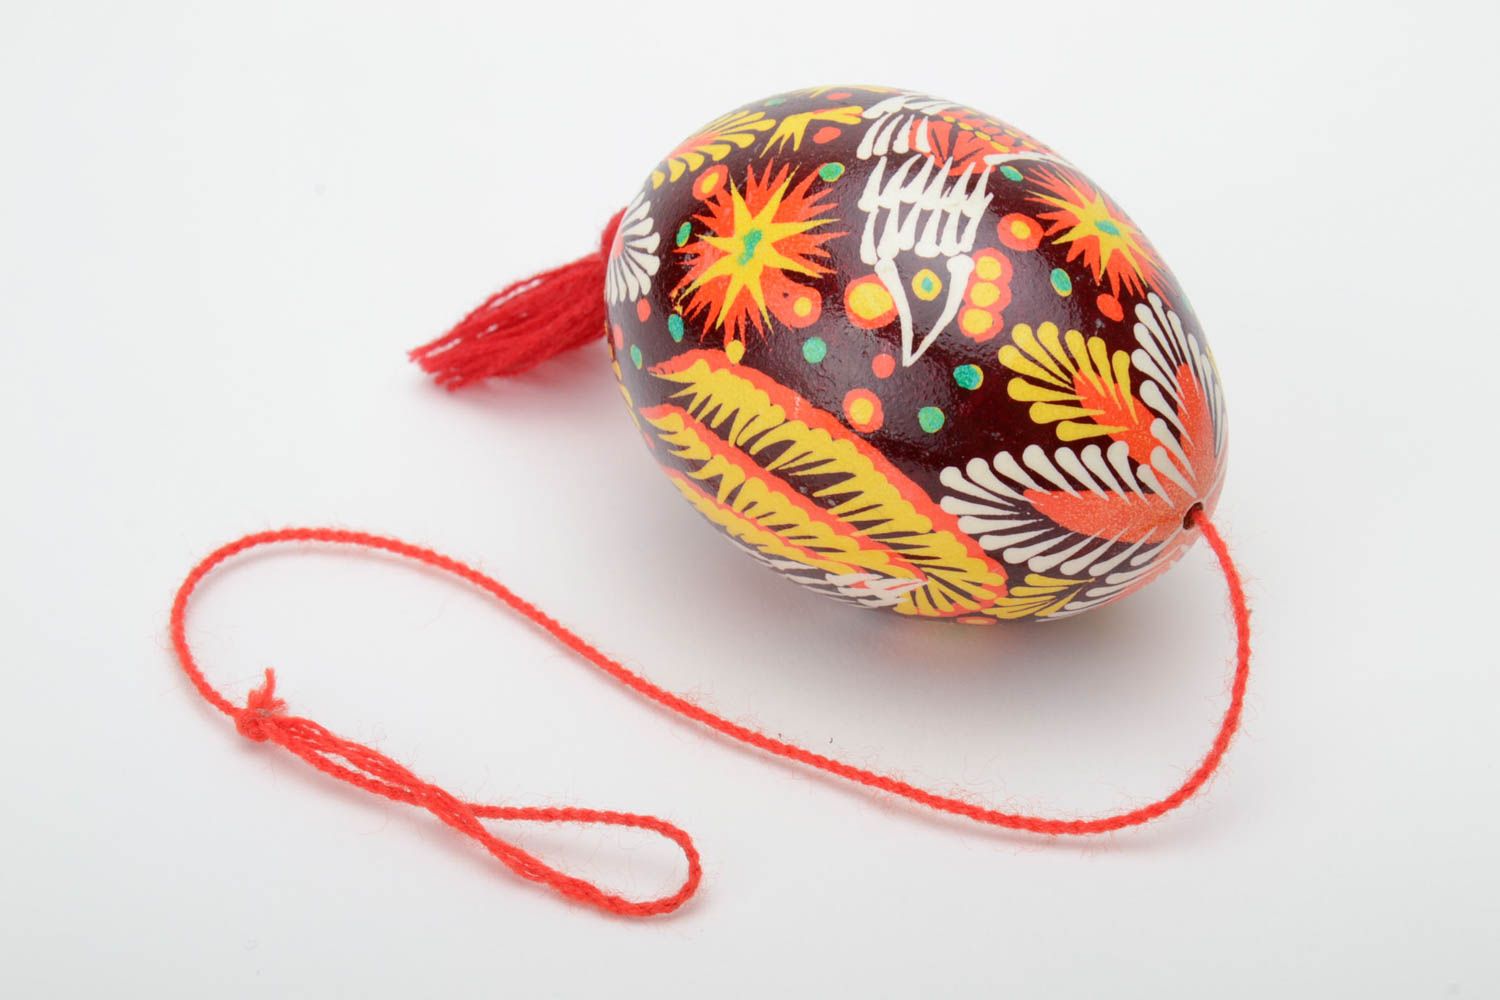 Handmade decorative painted Easter egg ornamented in Lemkiv style with red tassel photo 2